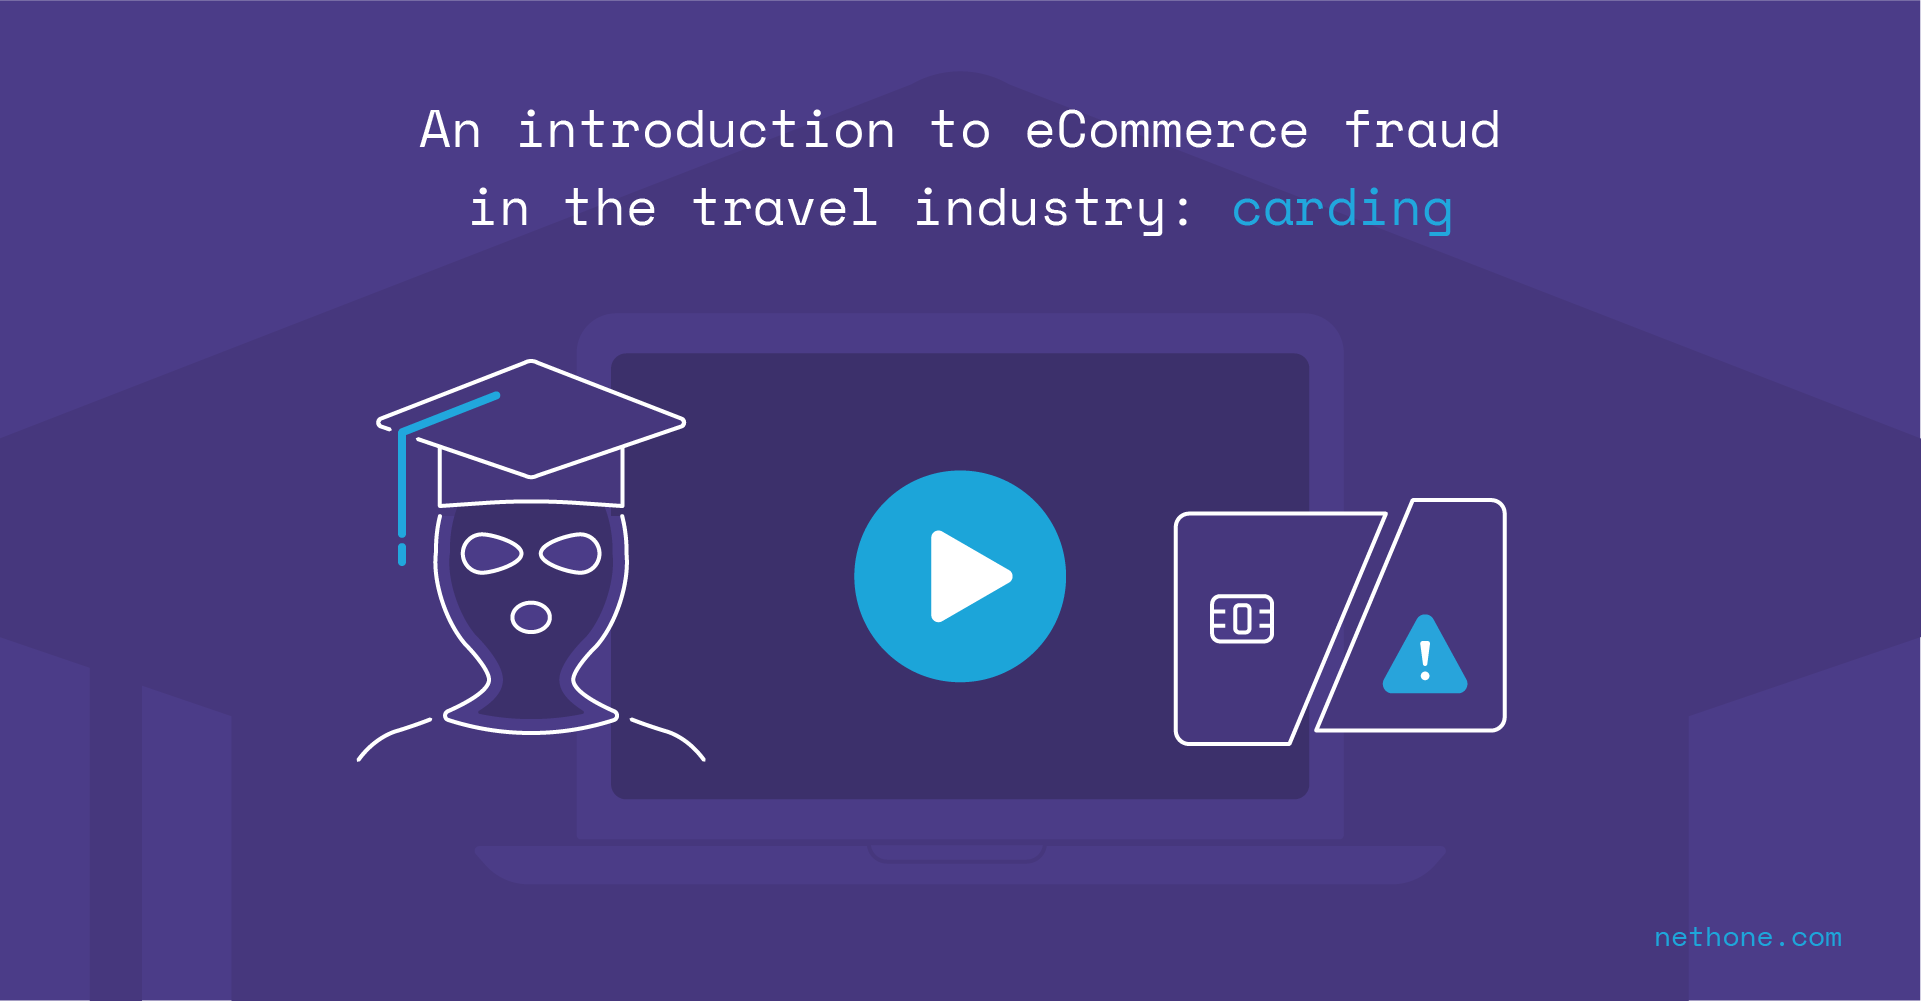 An introduction to eCommerce fraud in the travel industry and carding